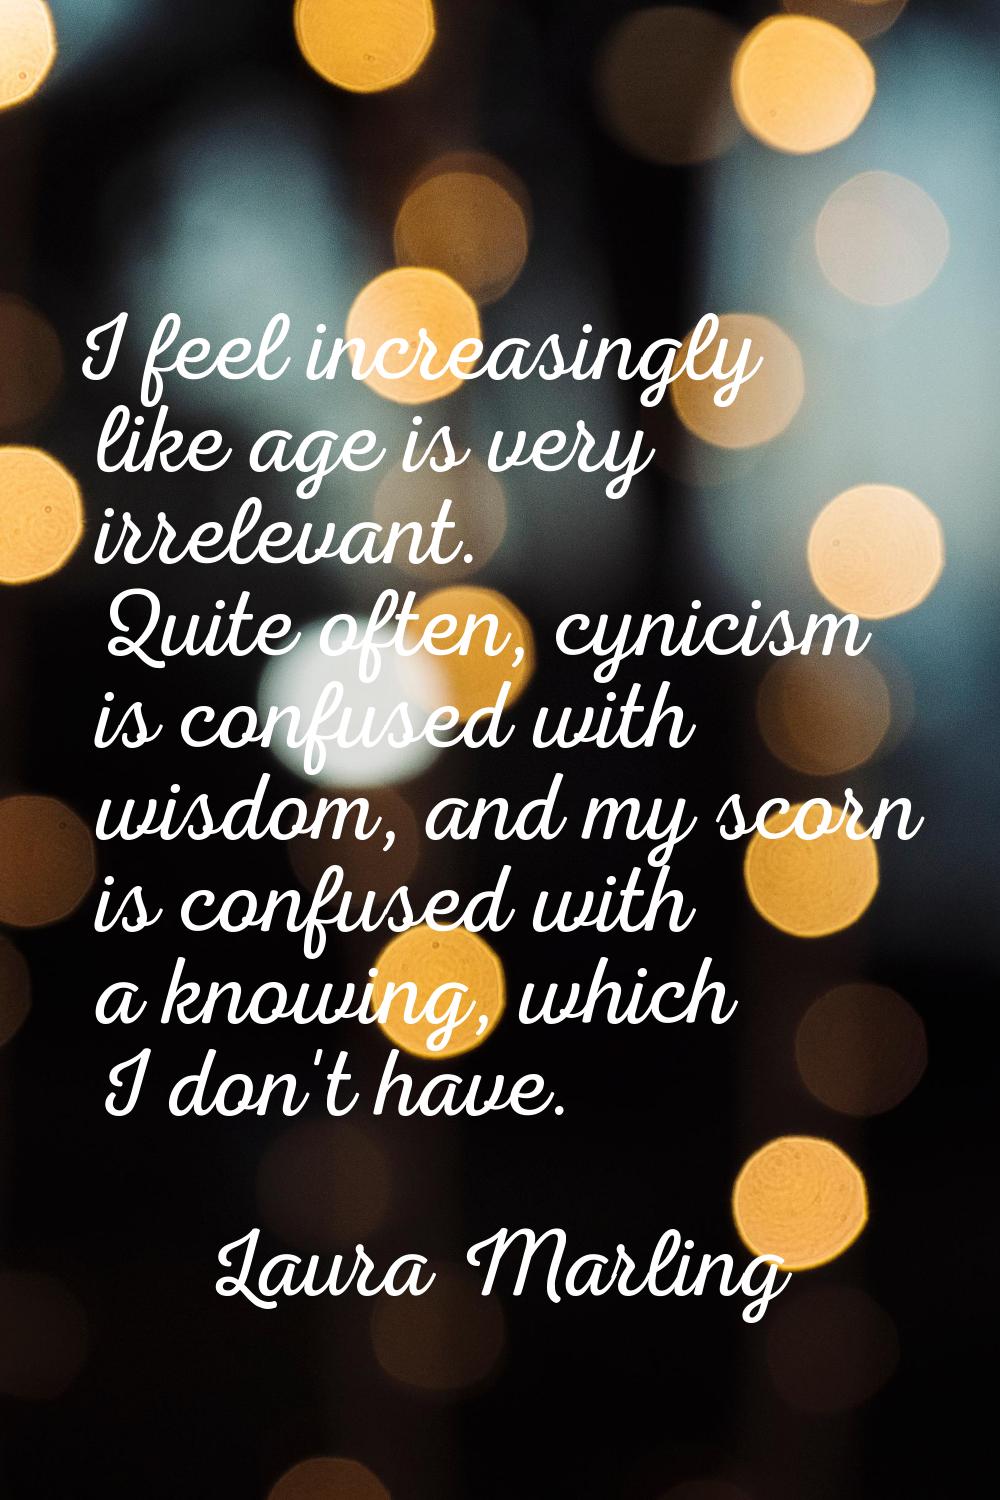 I feel increasingly like age is very irrelevant. Quite often, cynicism is confused with wisdom, and